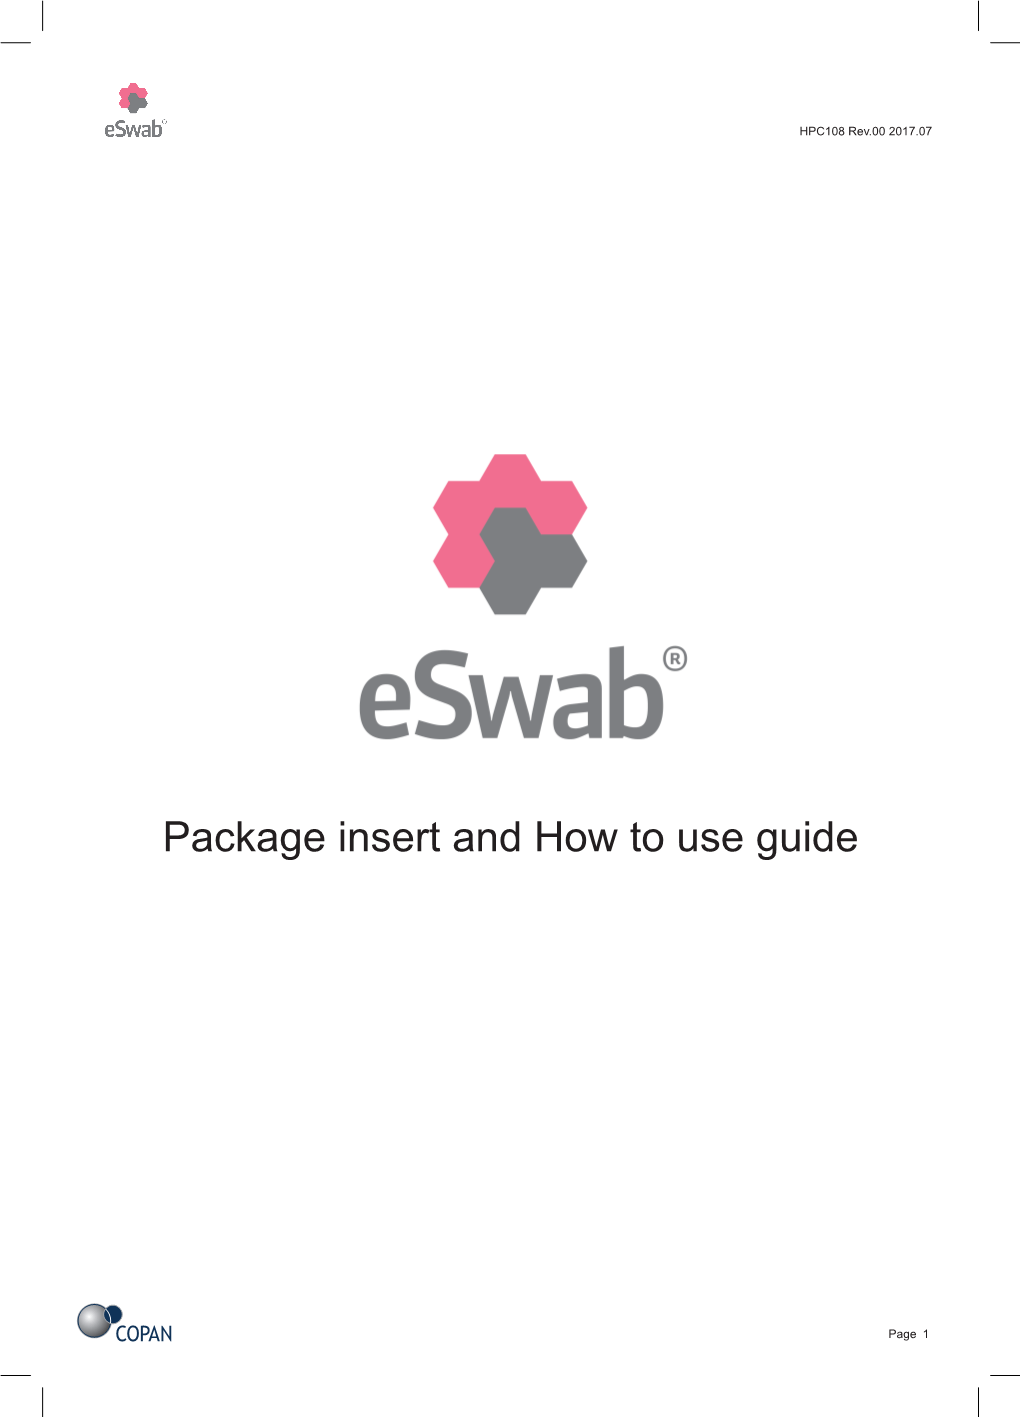 Package Insert and How to Use Guide